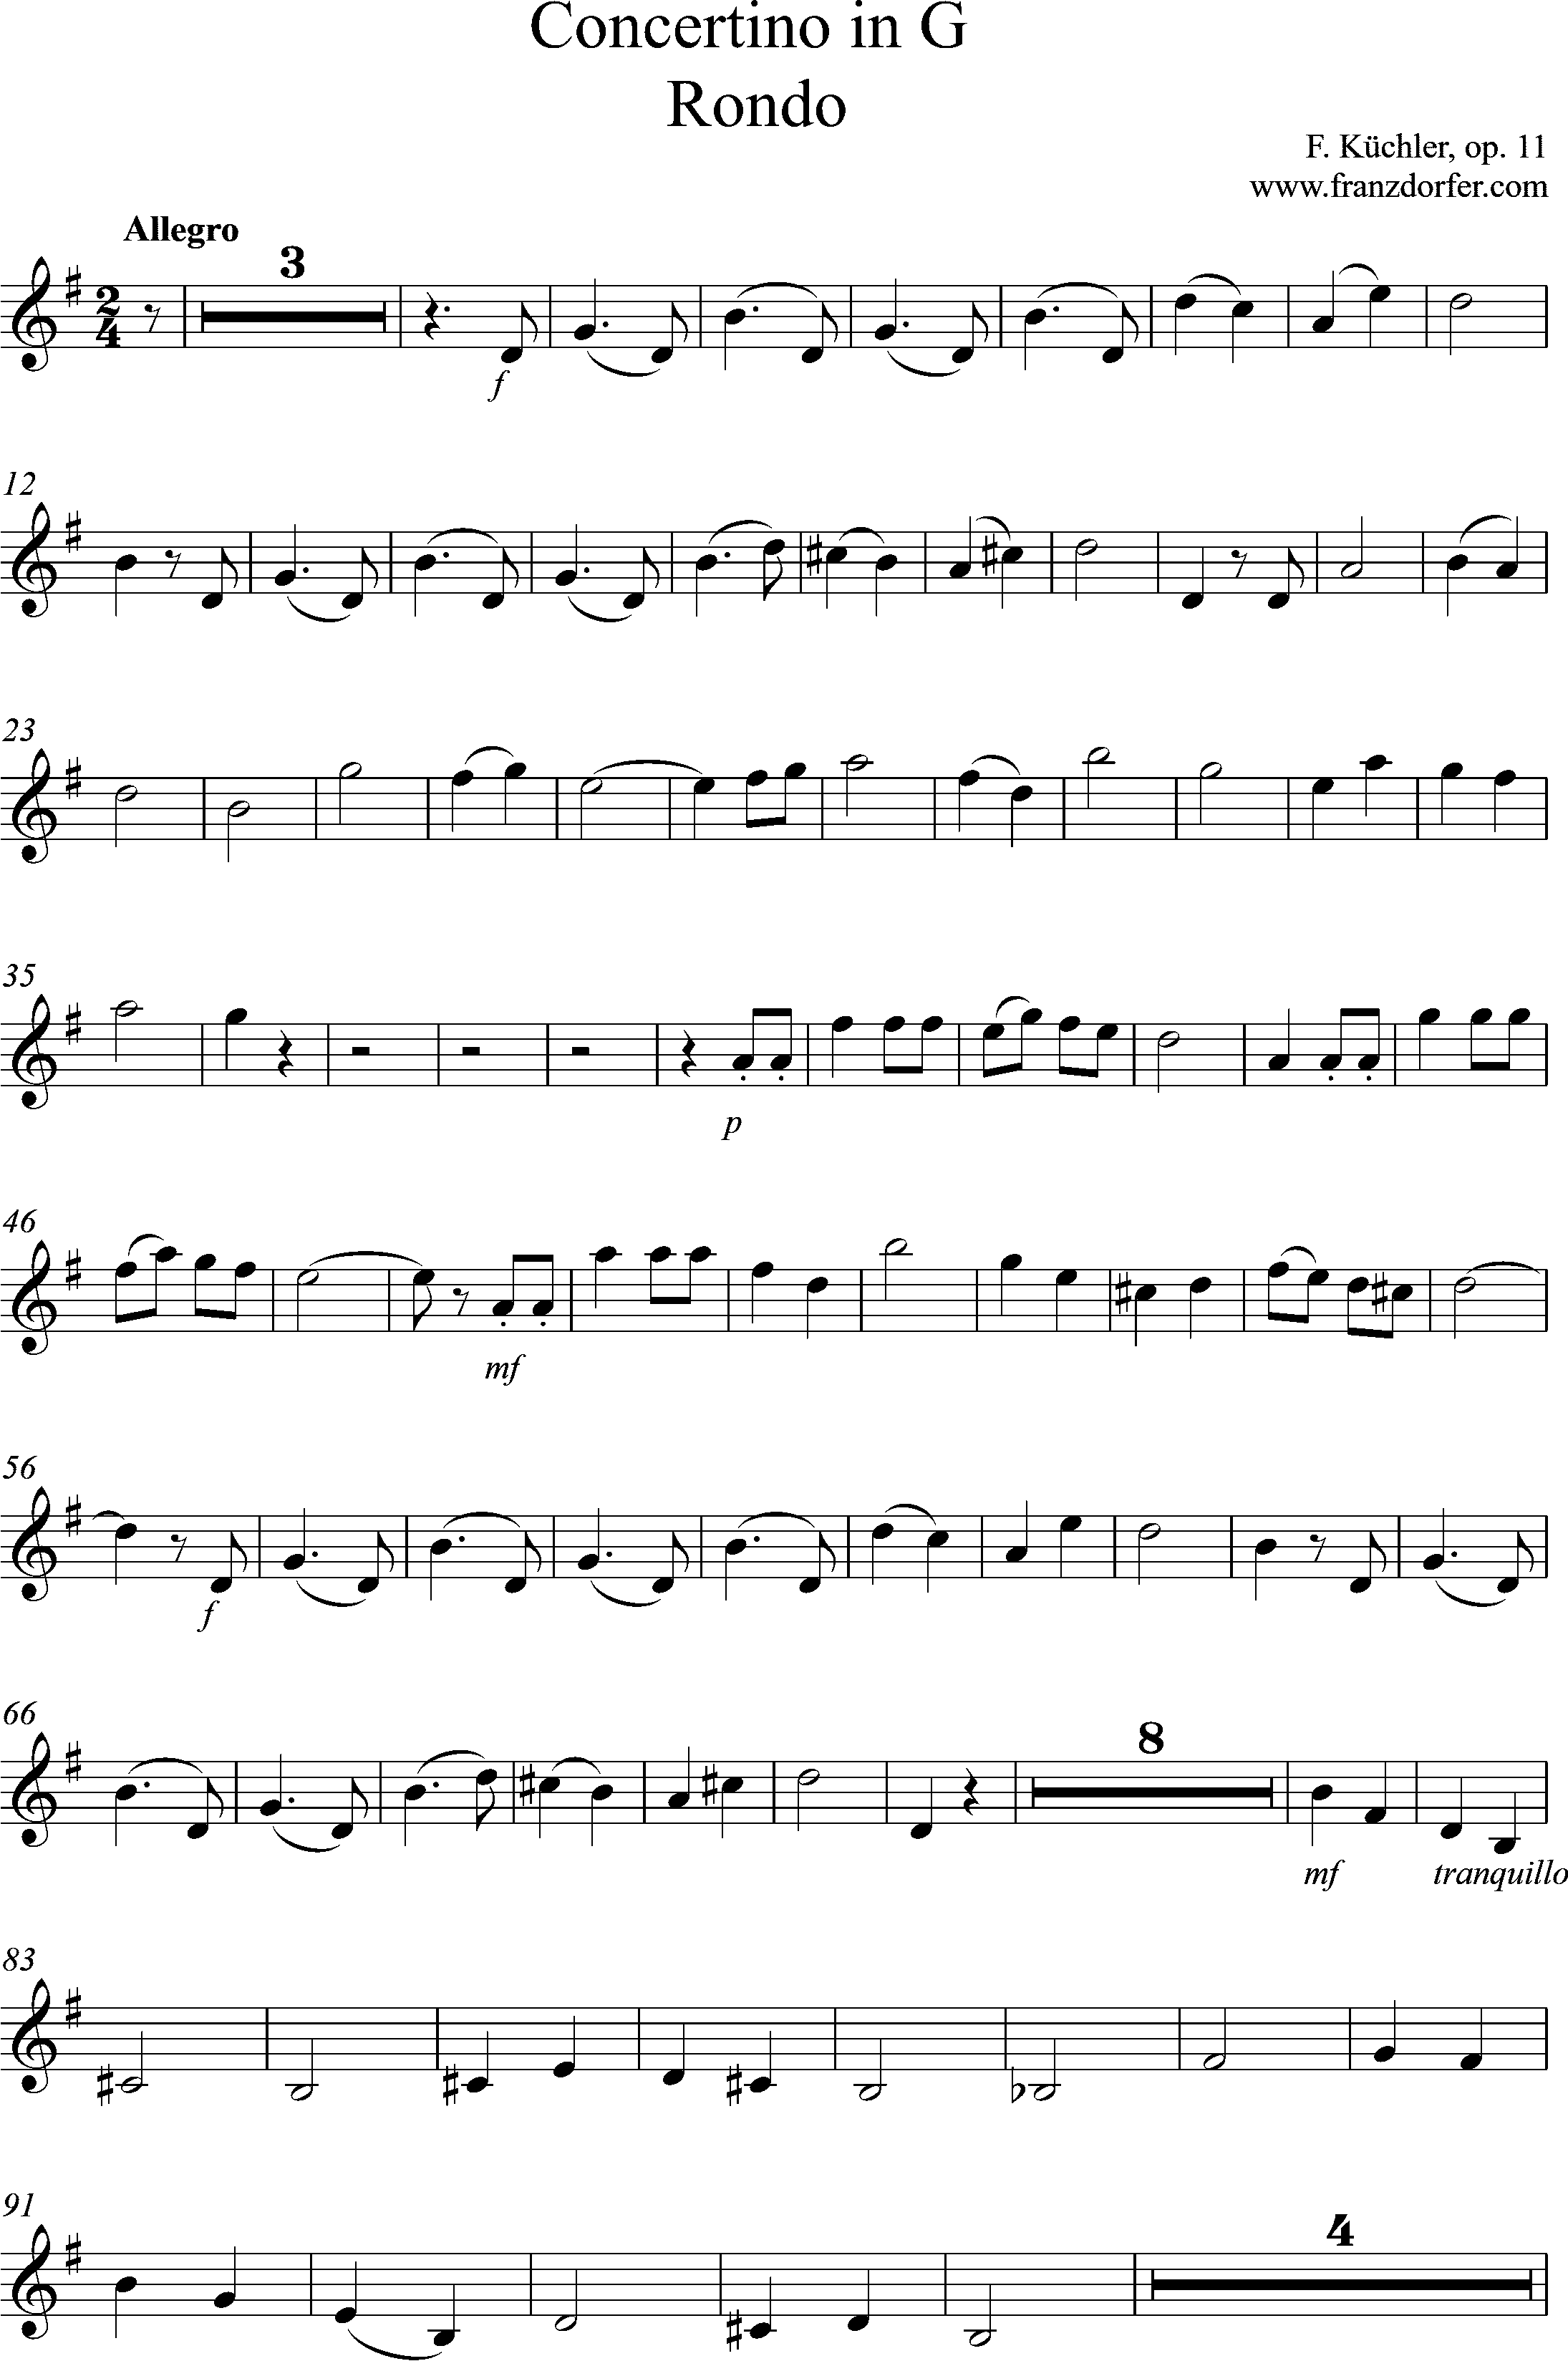 Solopart, from Concertino in G, Rondo